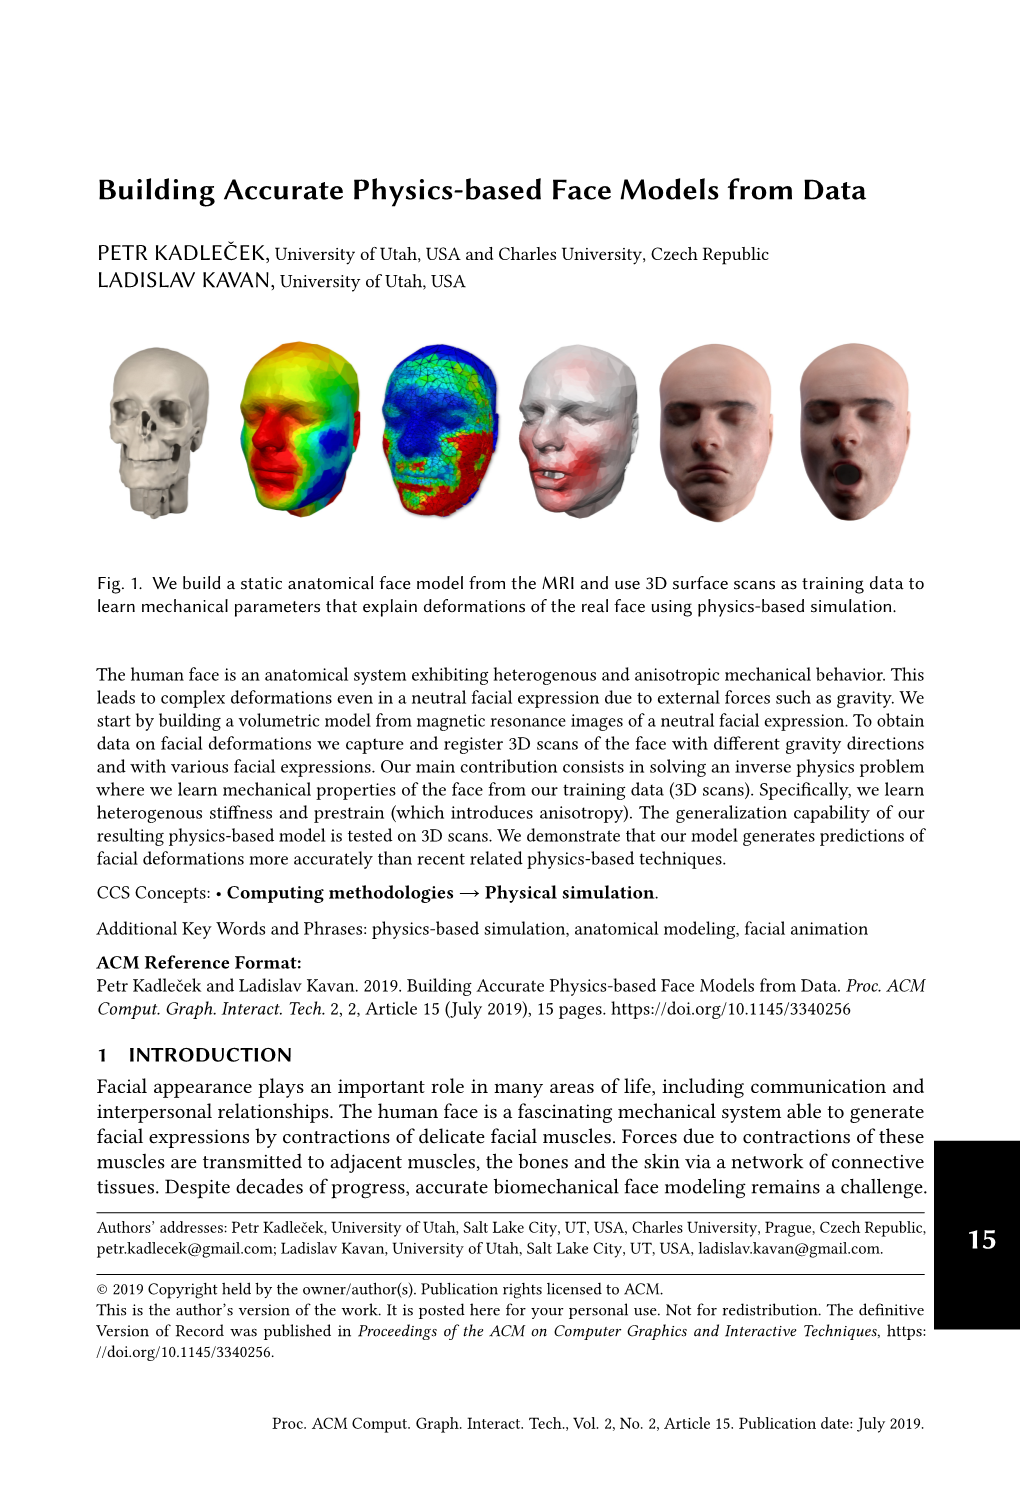 Building Accurate Physics-Based Face Models from Data